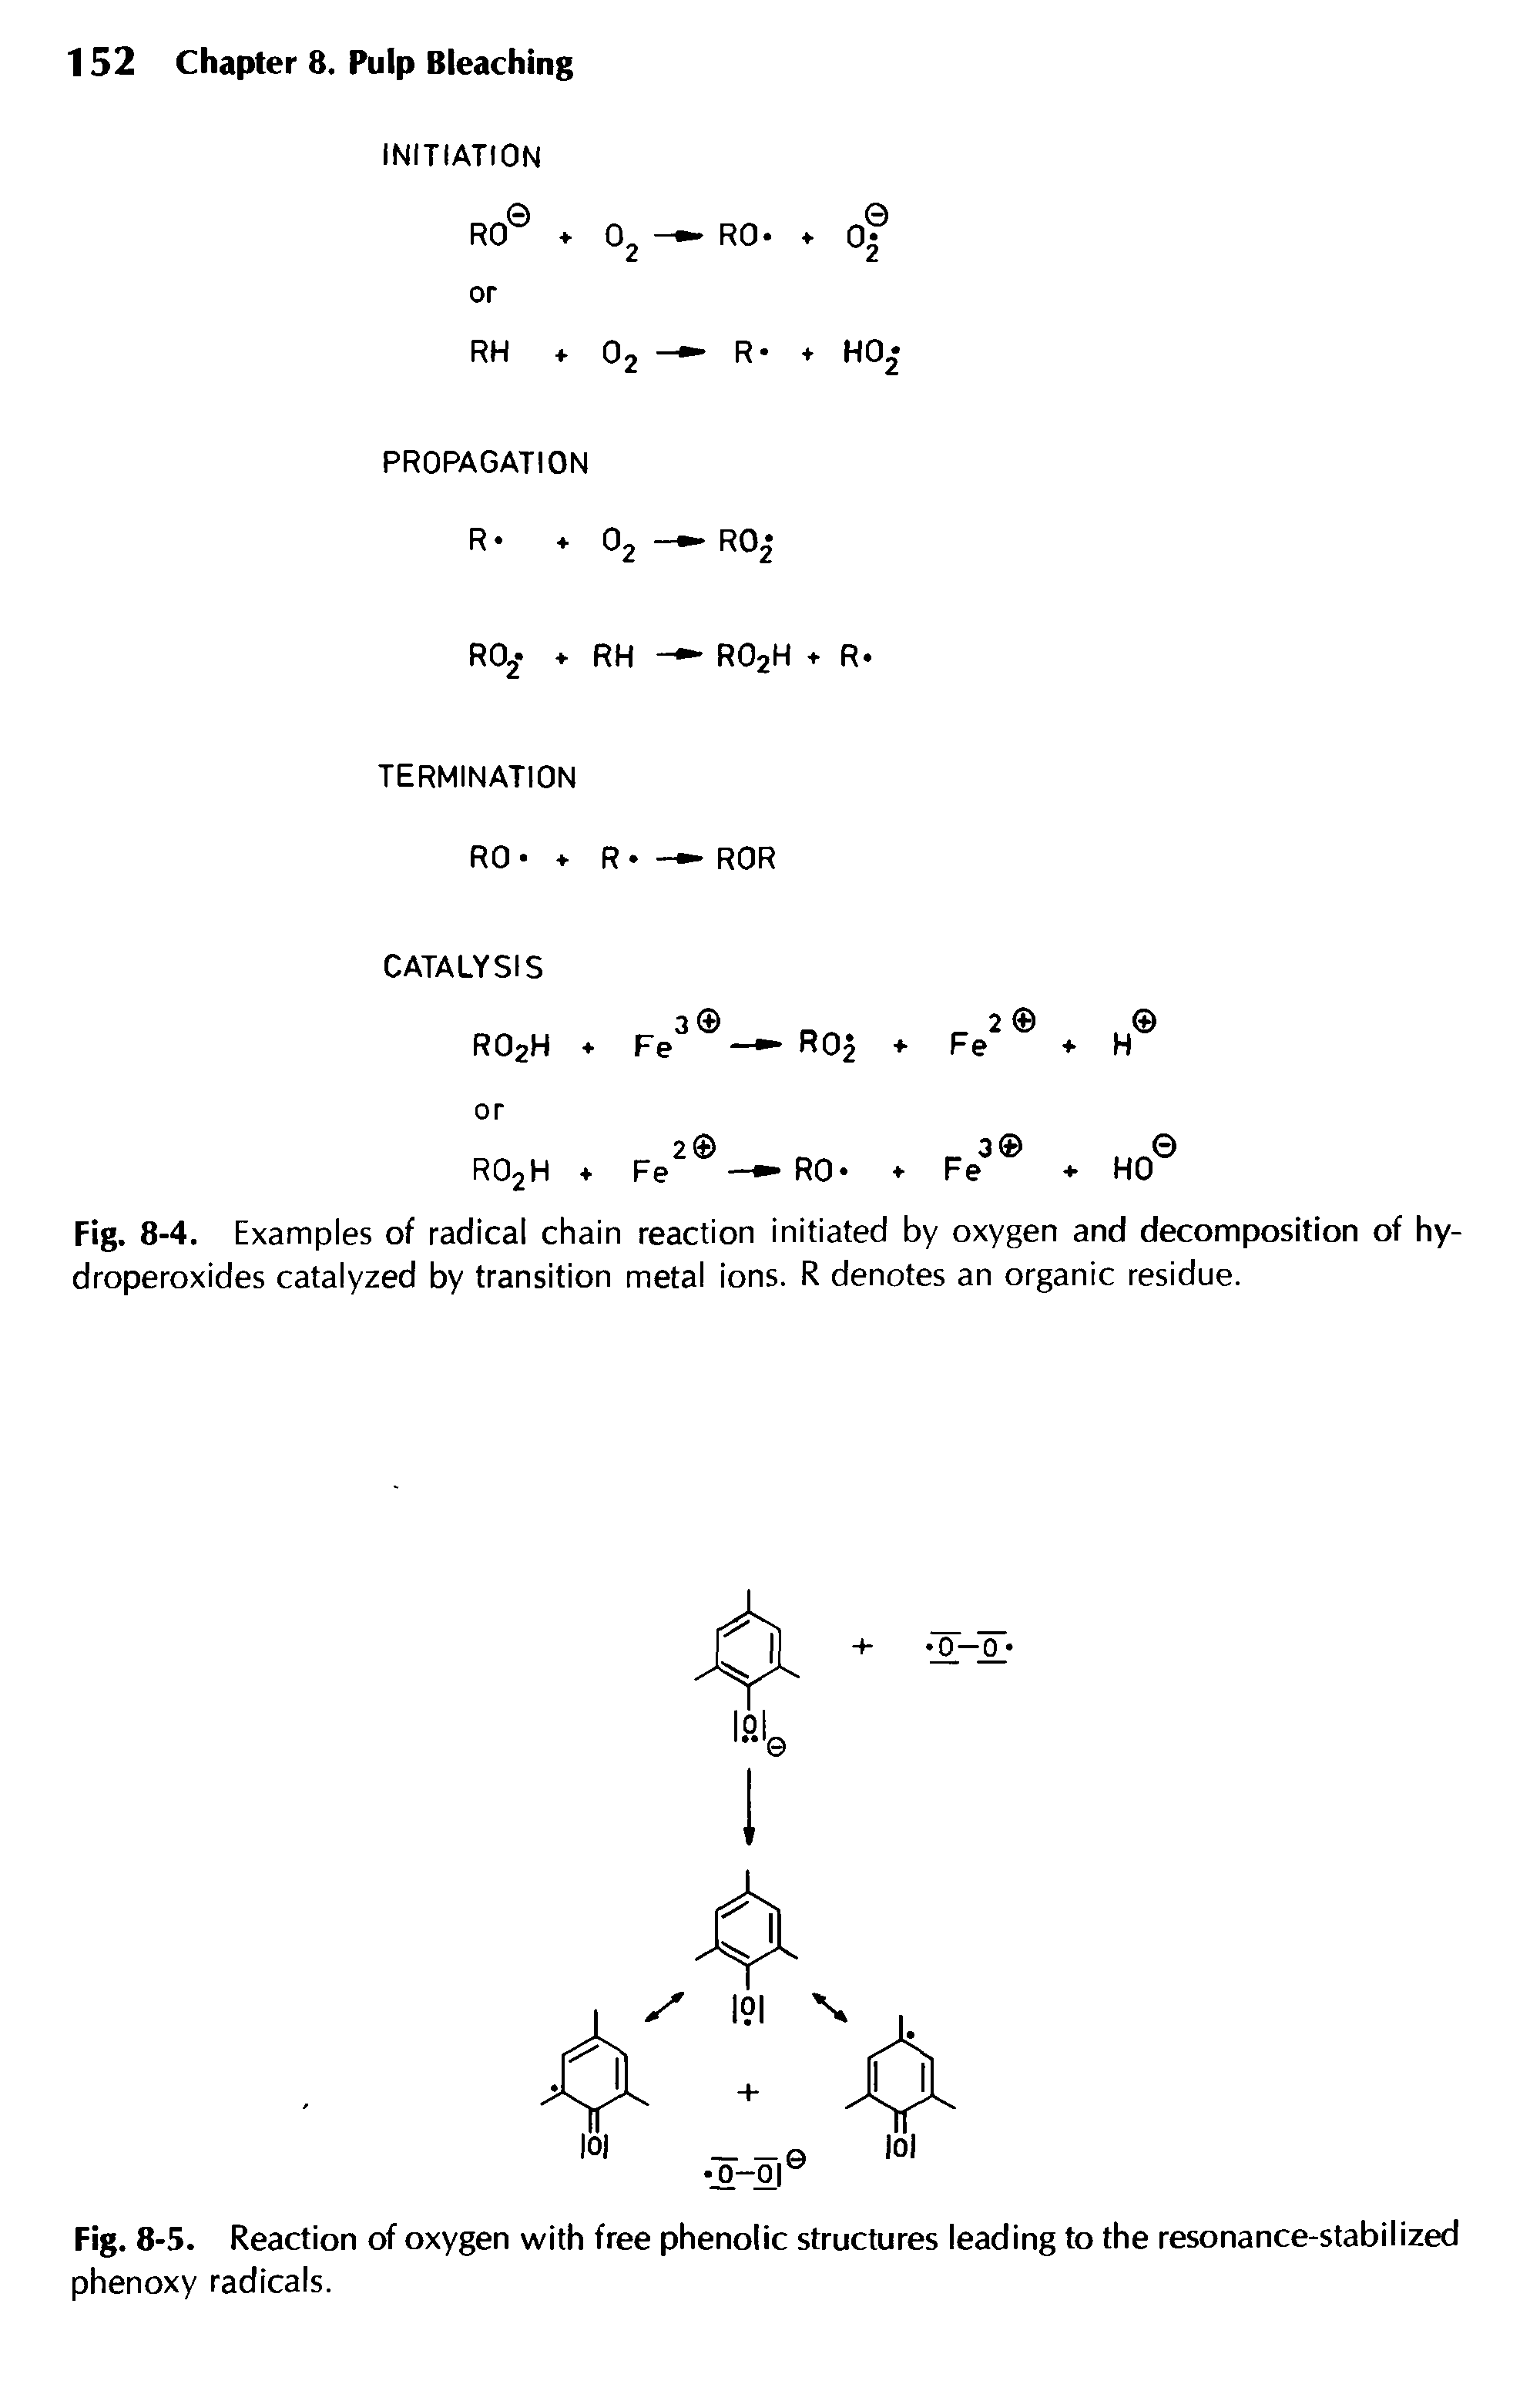 Fig. 8-4. Examples of radical chain reaction initiated by oxygen and decomposition of hydroperoxides catalyzed by transition metal ions. R denotes an organic residue.